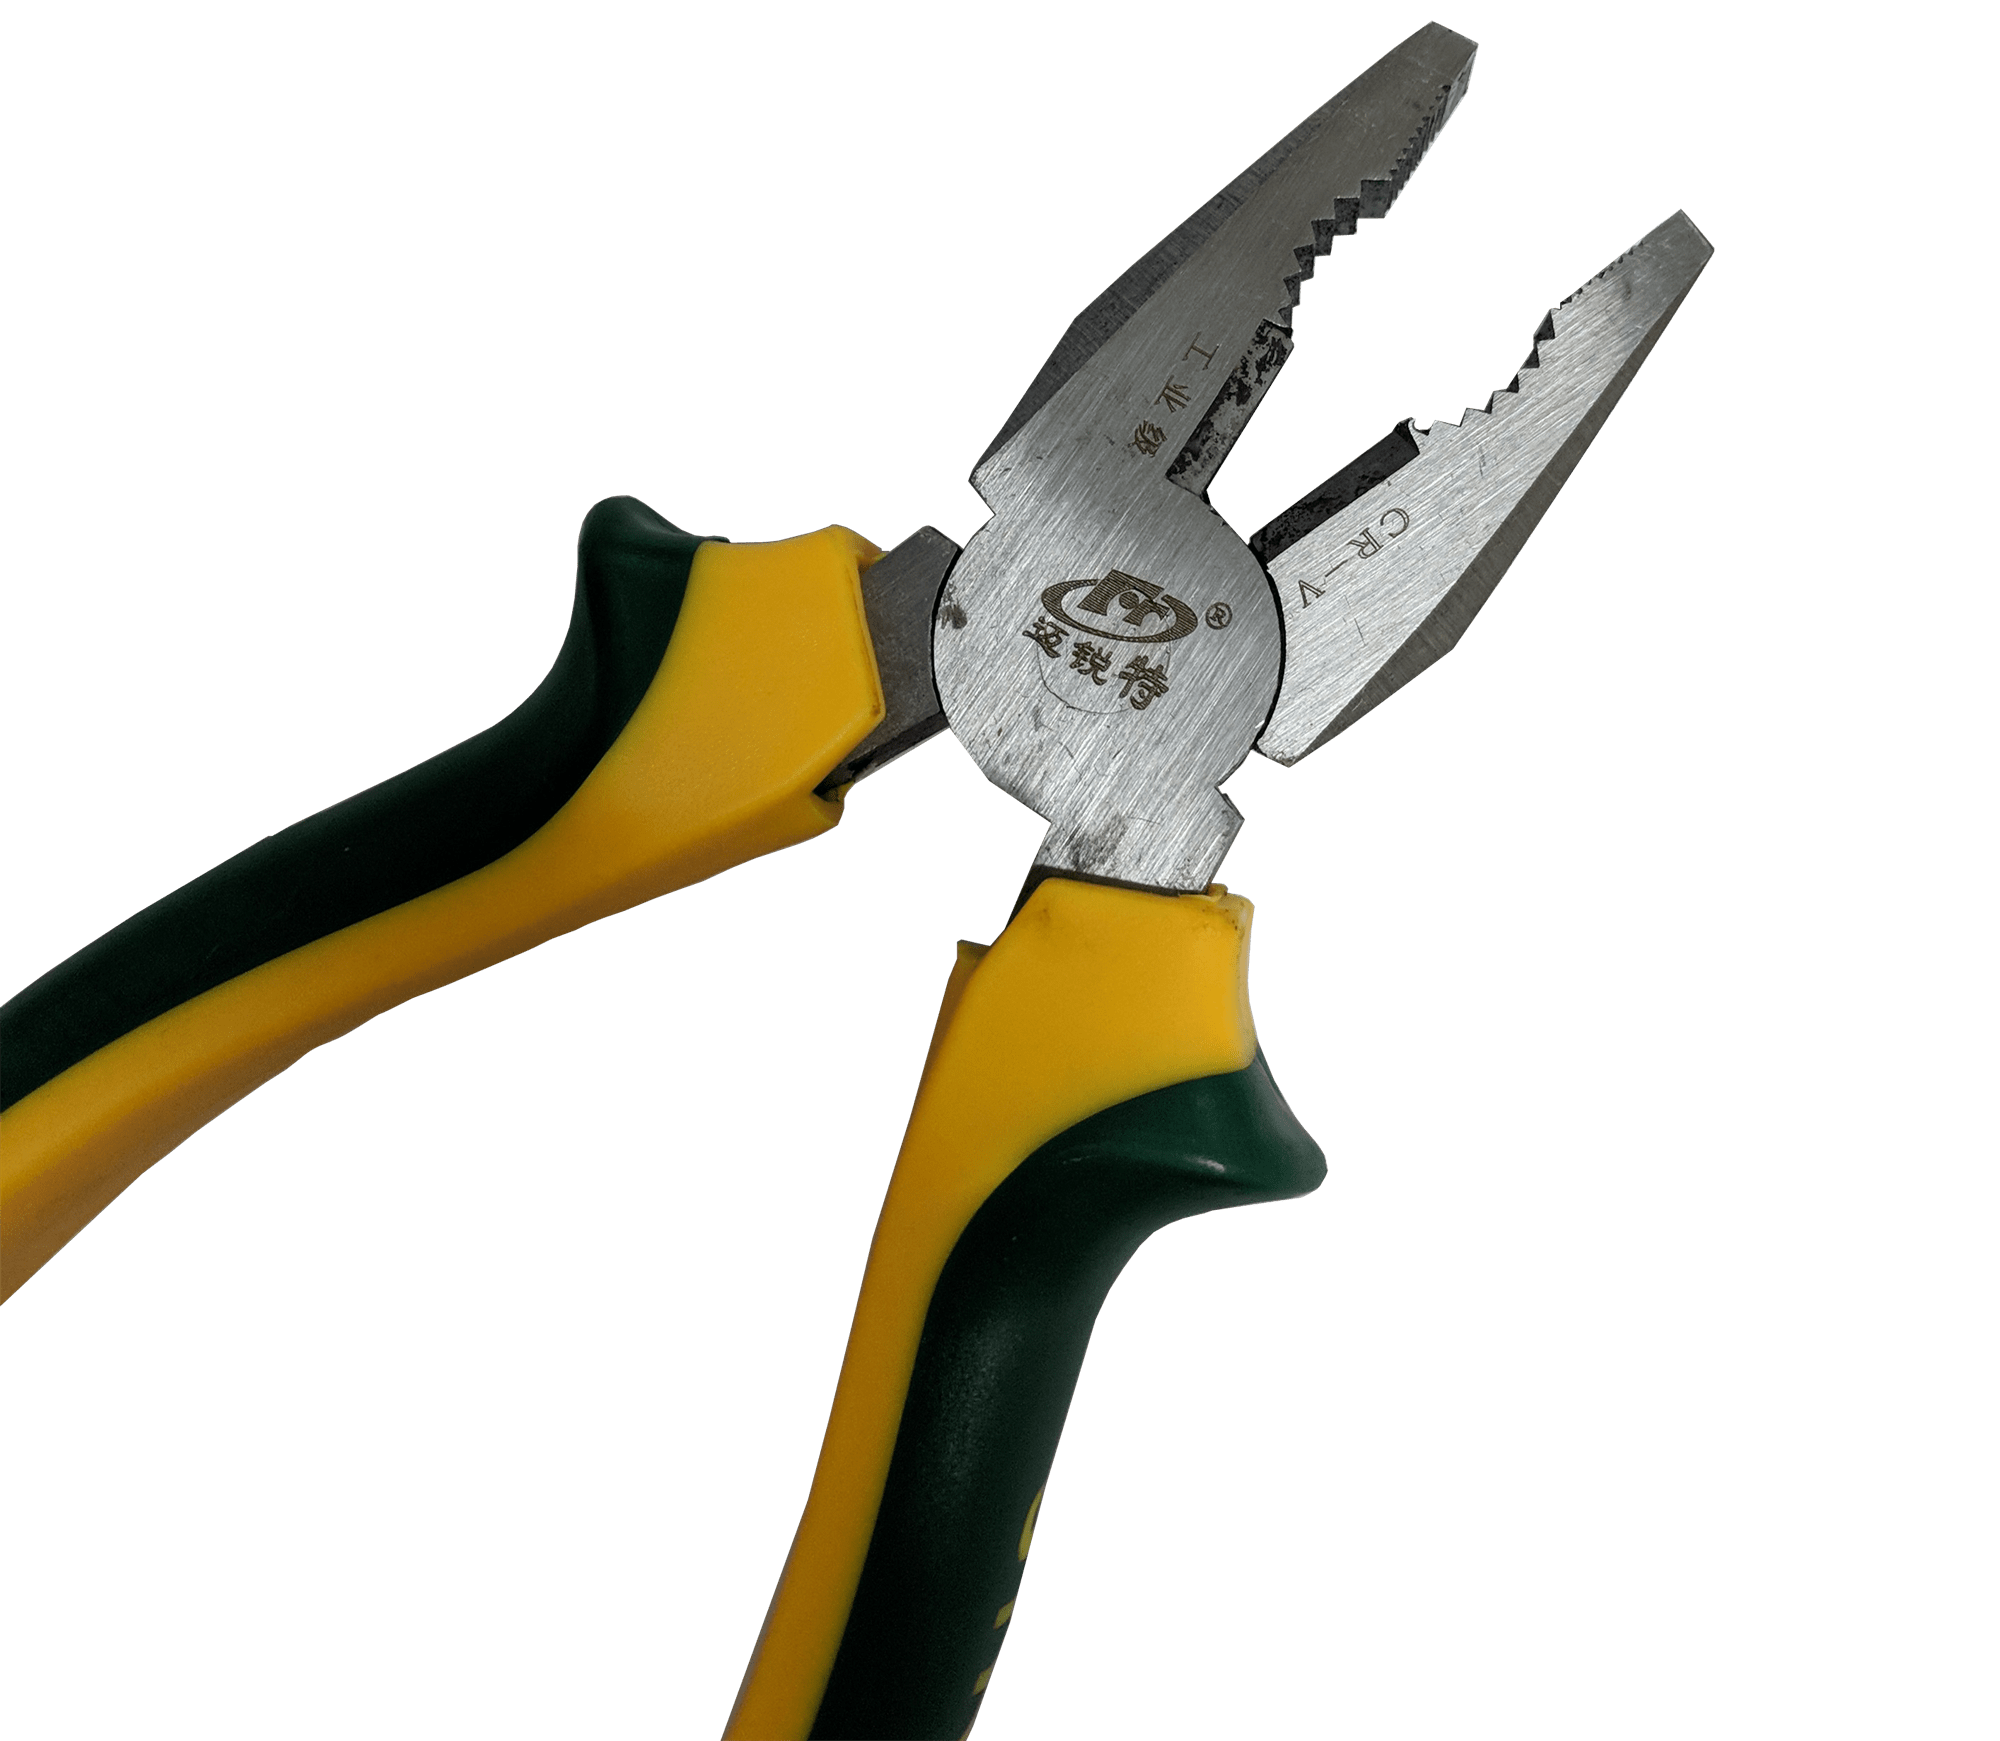 Heavy Duty Bull Nose Pliers - High Quality Soft Grip Handles - 150mm